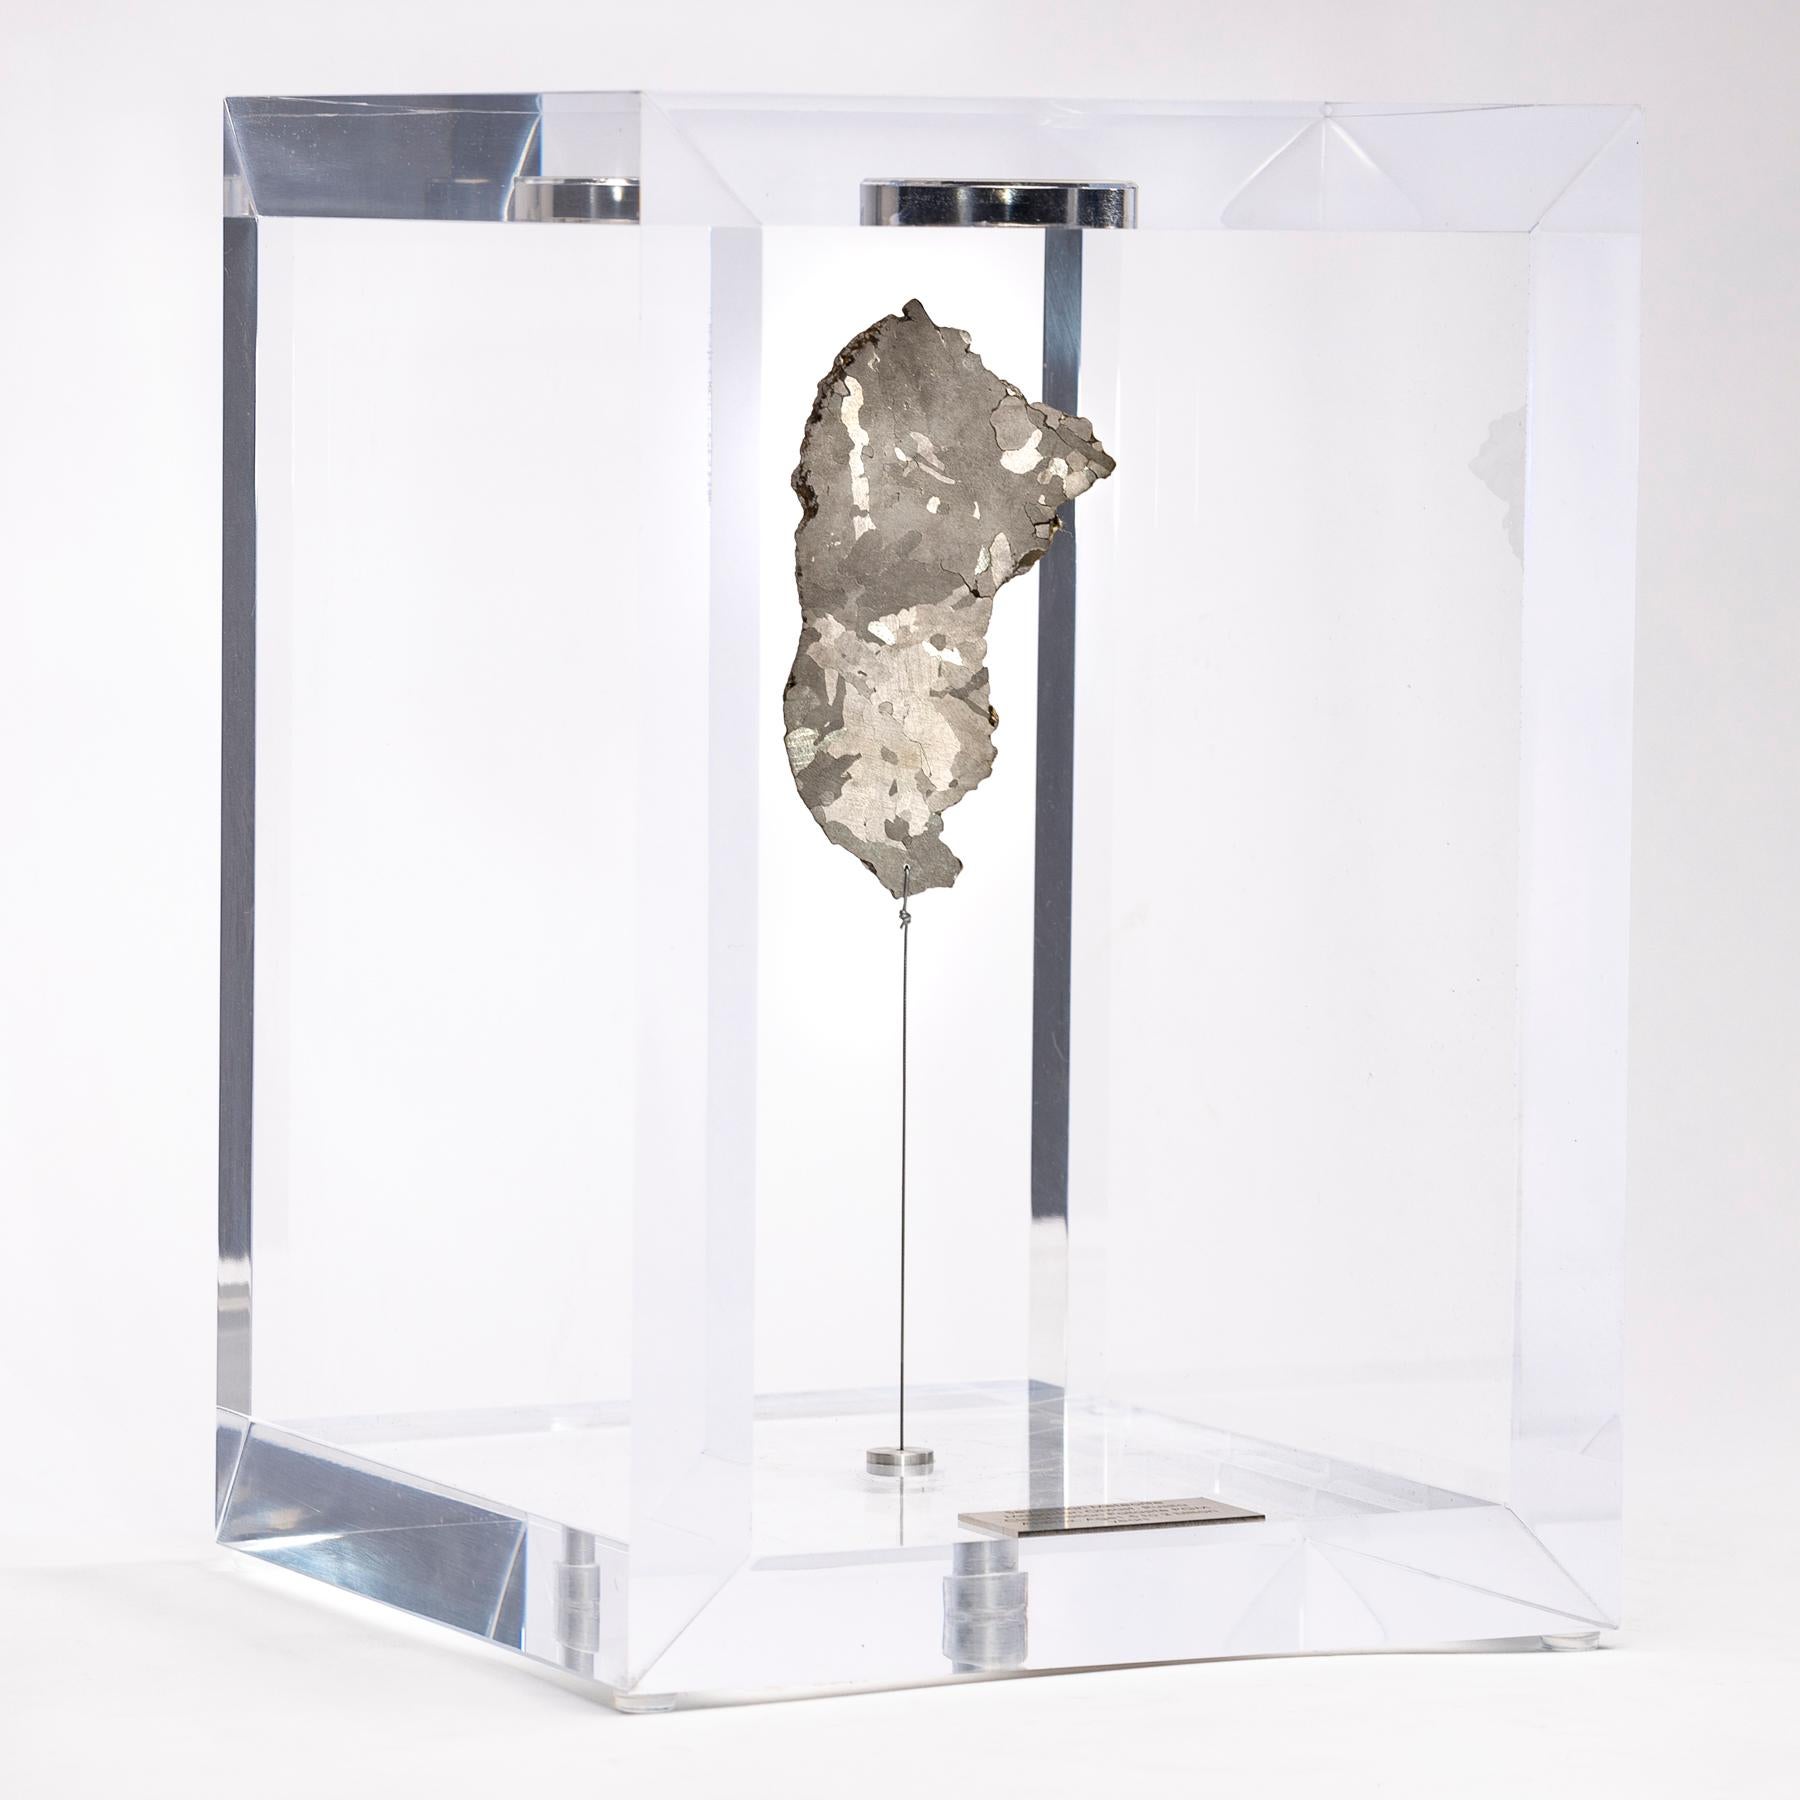 The “Space Box” was designed by Ernesto Duran, as a creative way to enhance the uniqueness of meteorites and could also be use as a decorative piece. It´s an acrylic box with a magnet on top and a steel string pulling the meteorite straight